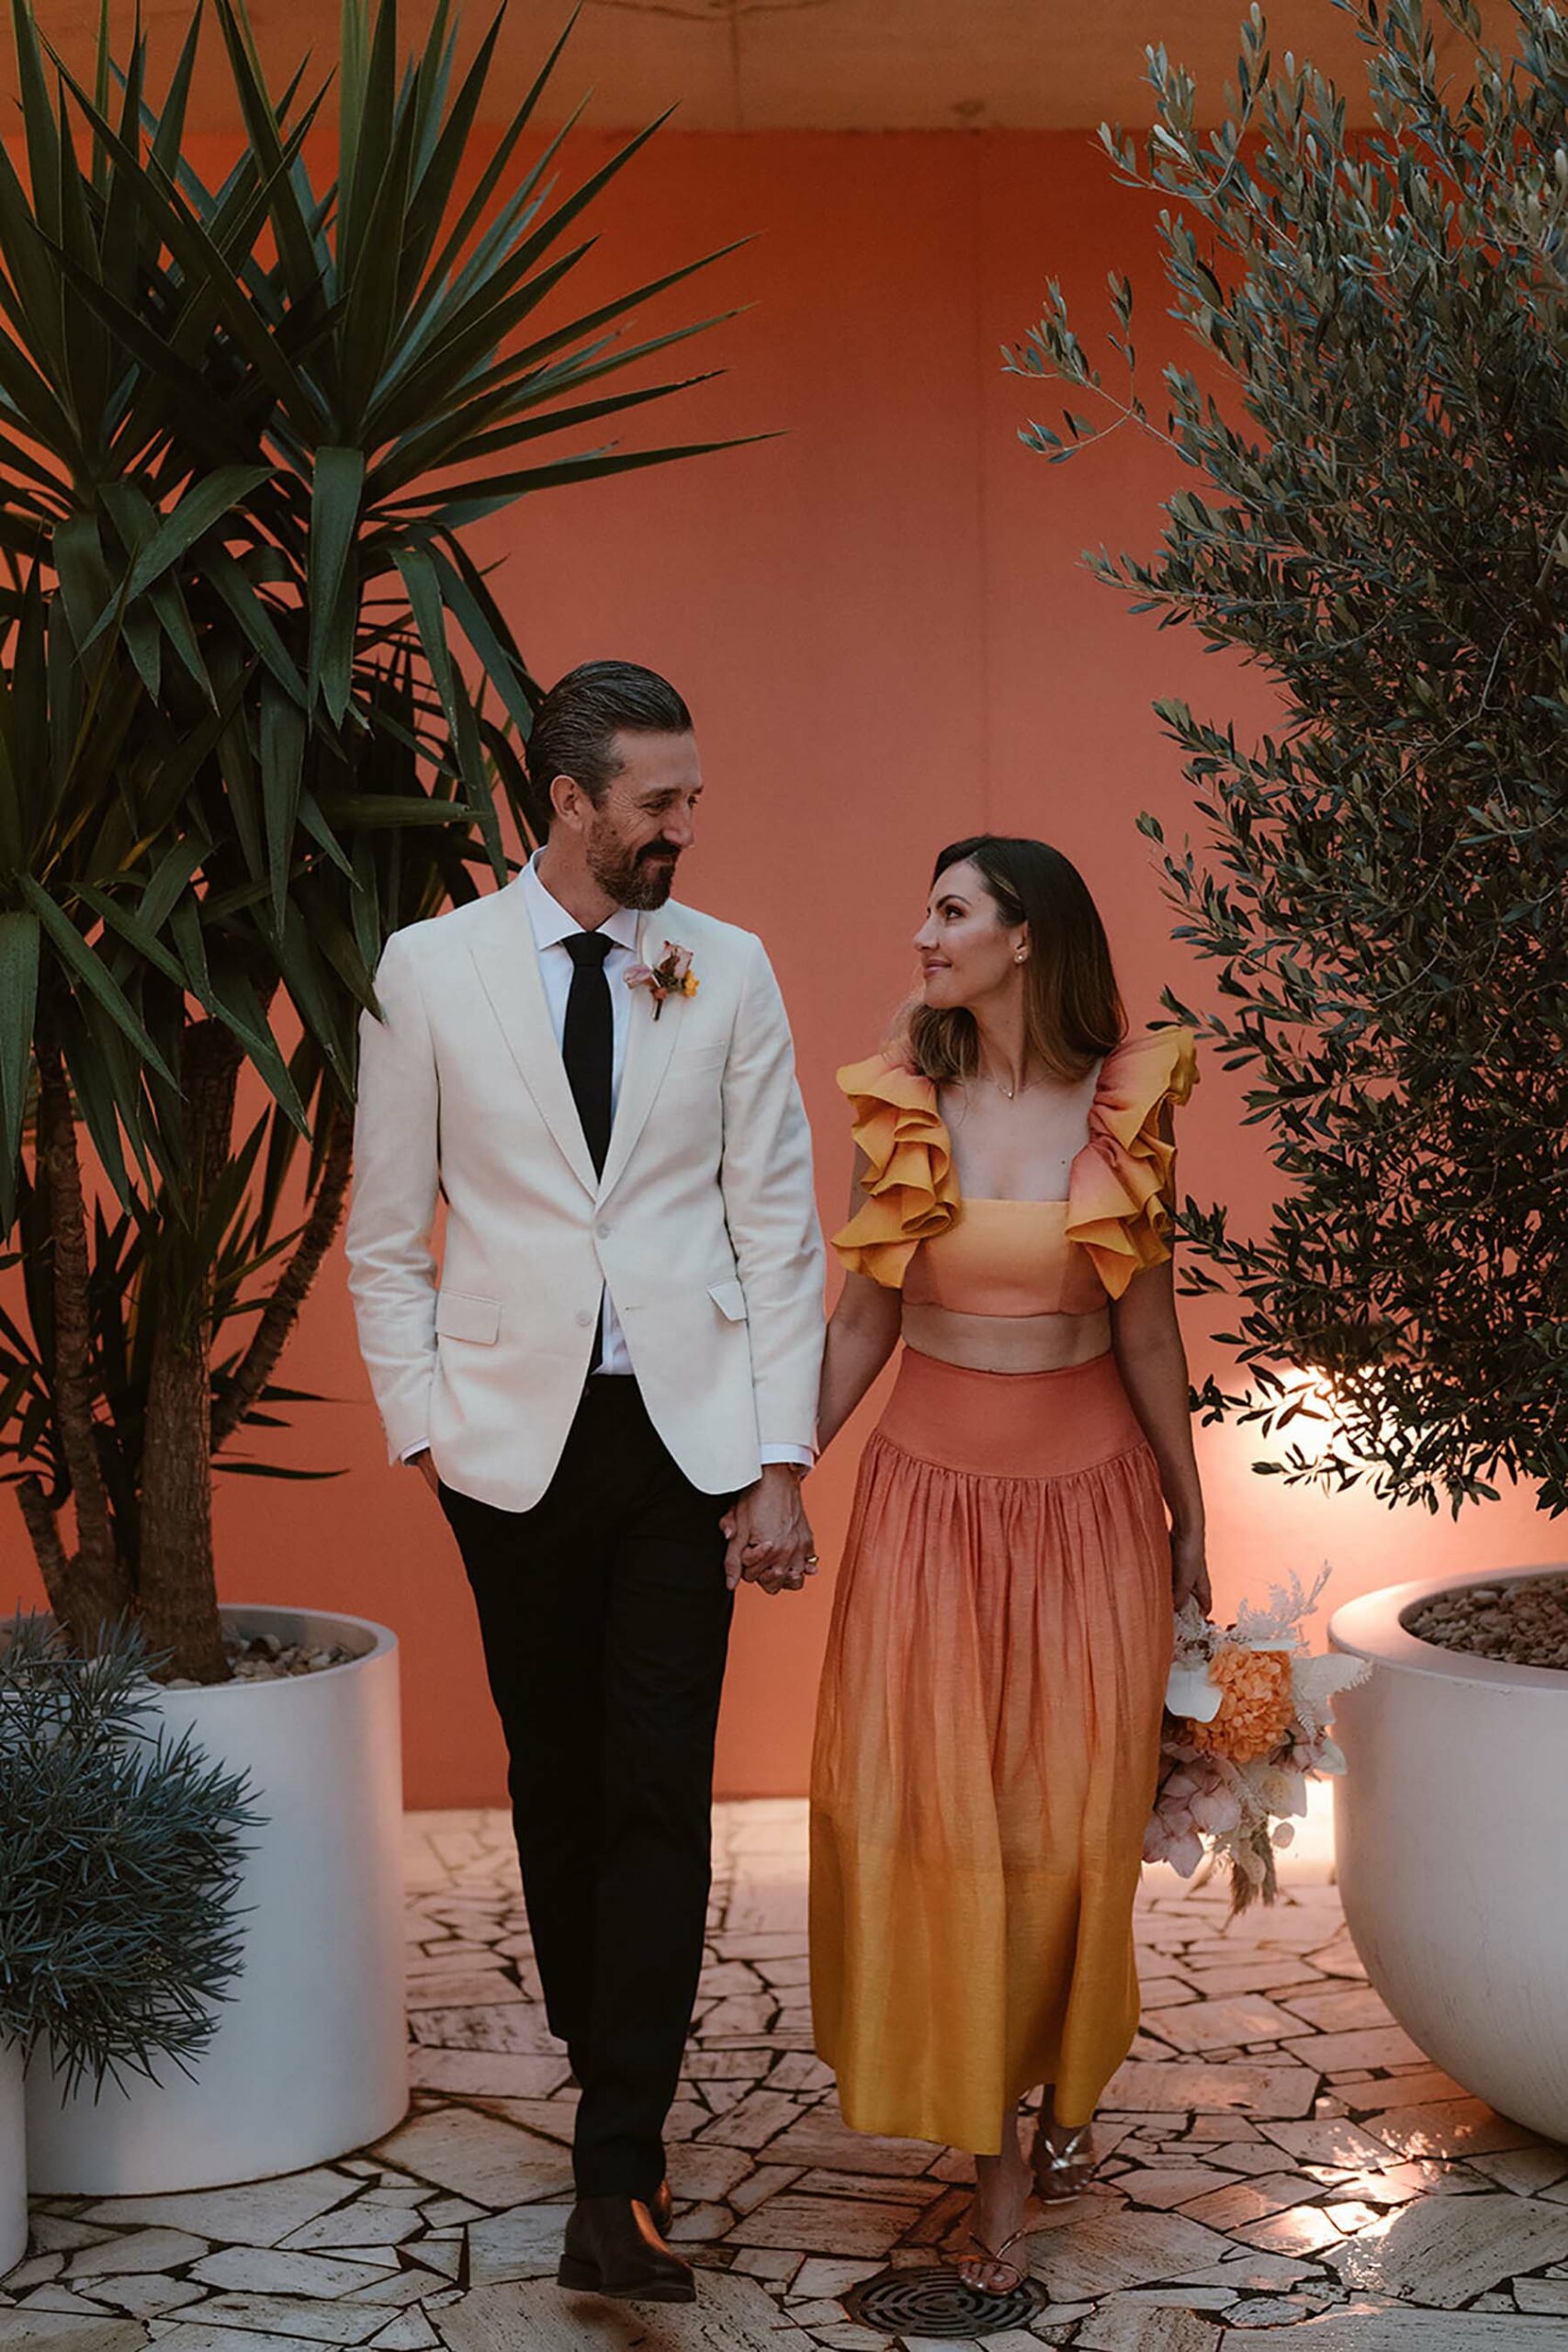 The Calile Hotel Rooftop Elopement